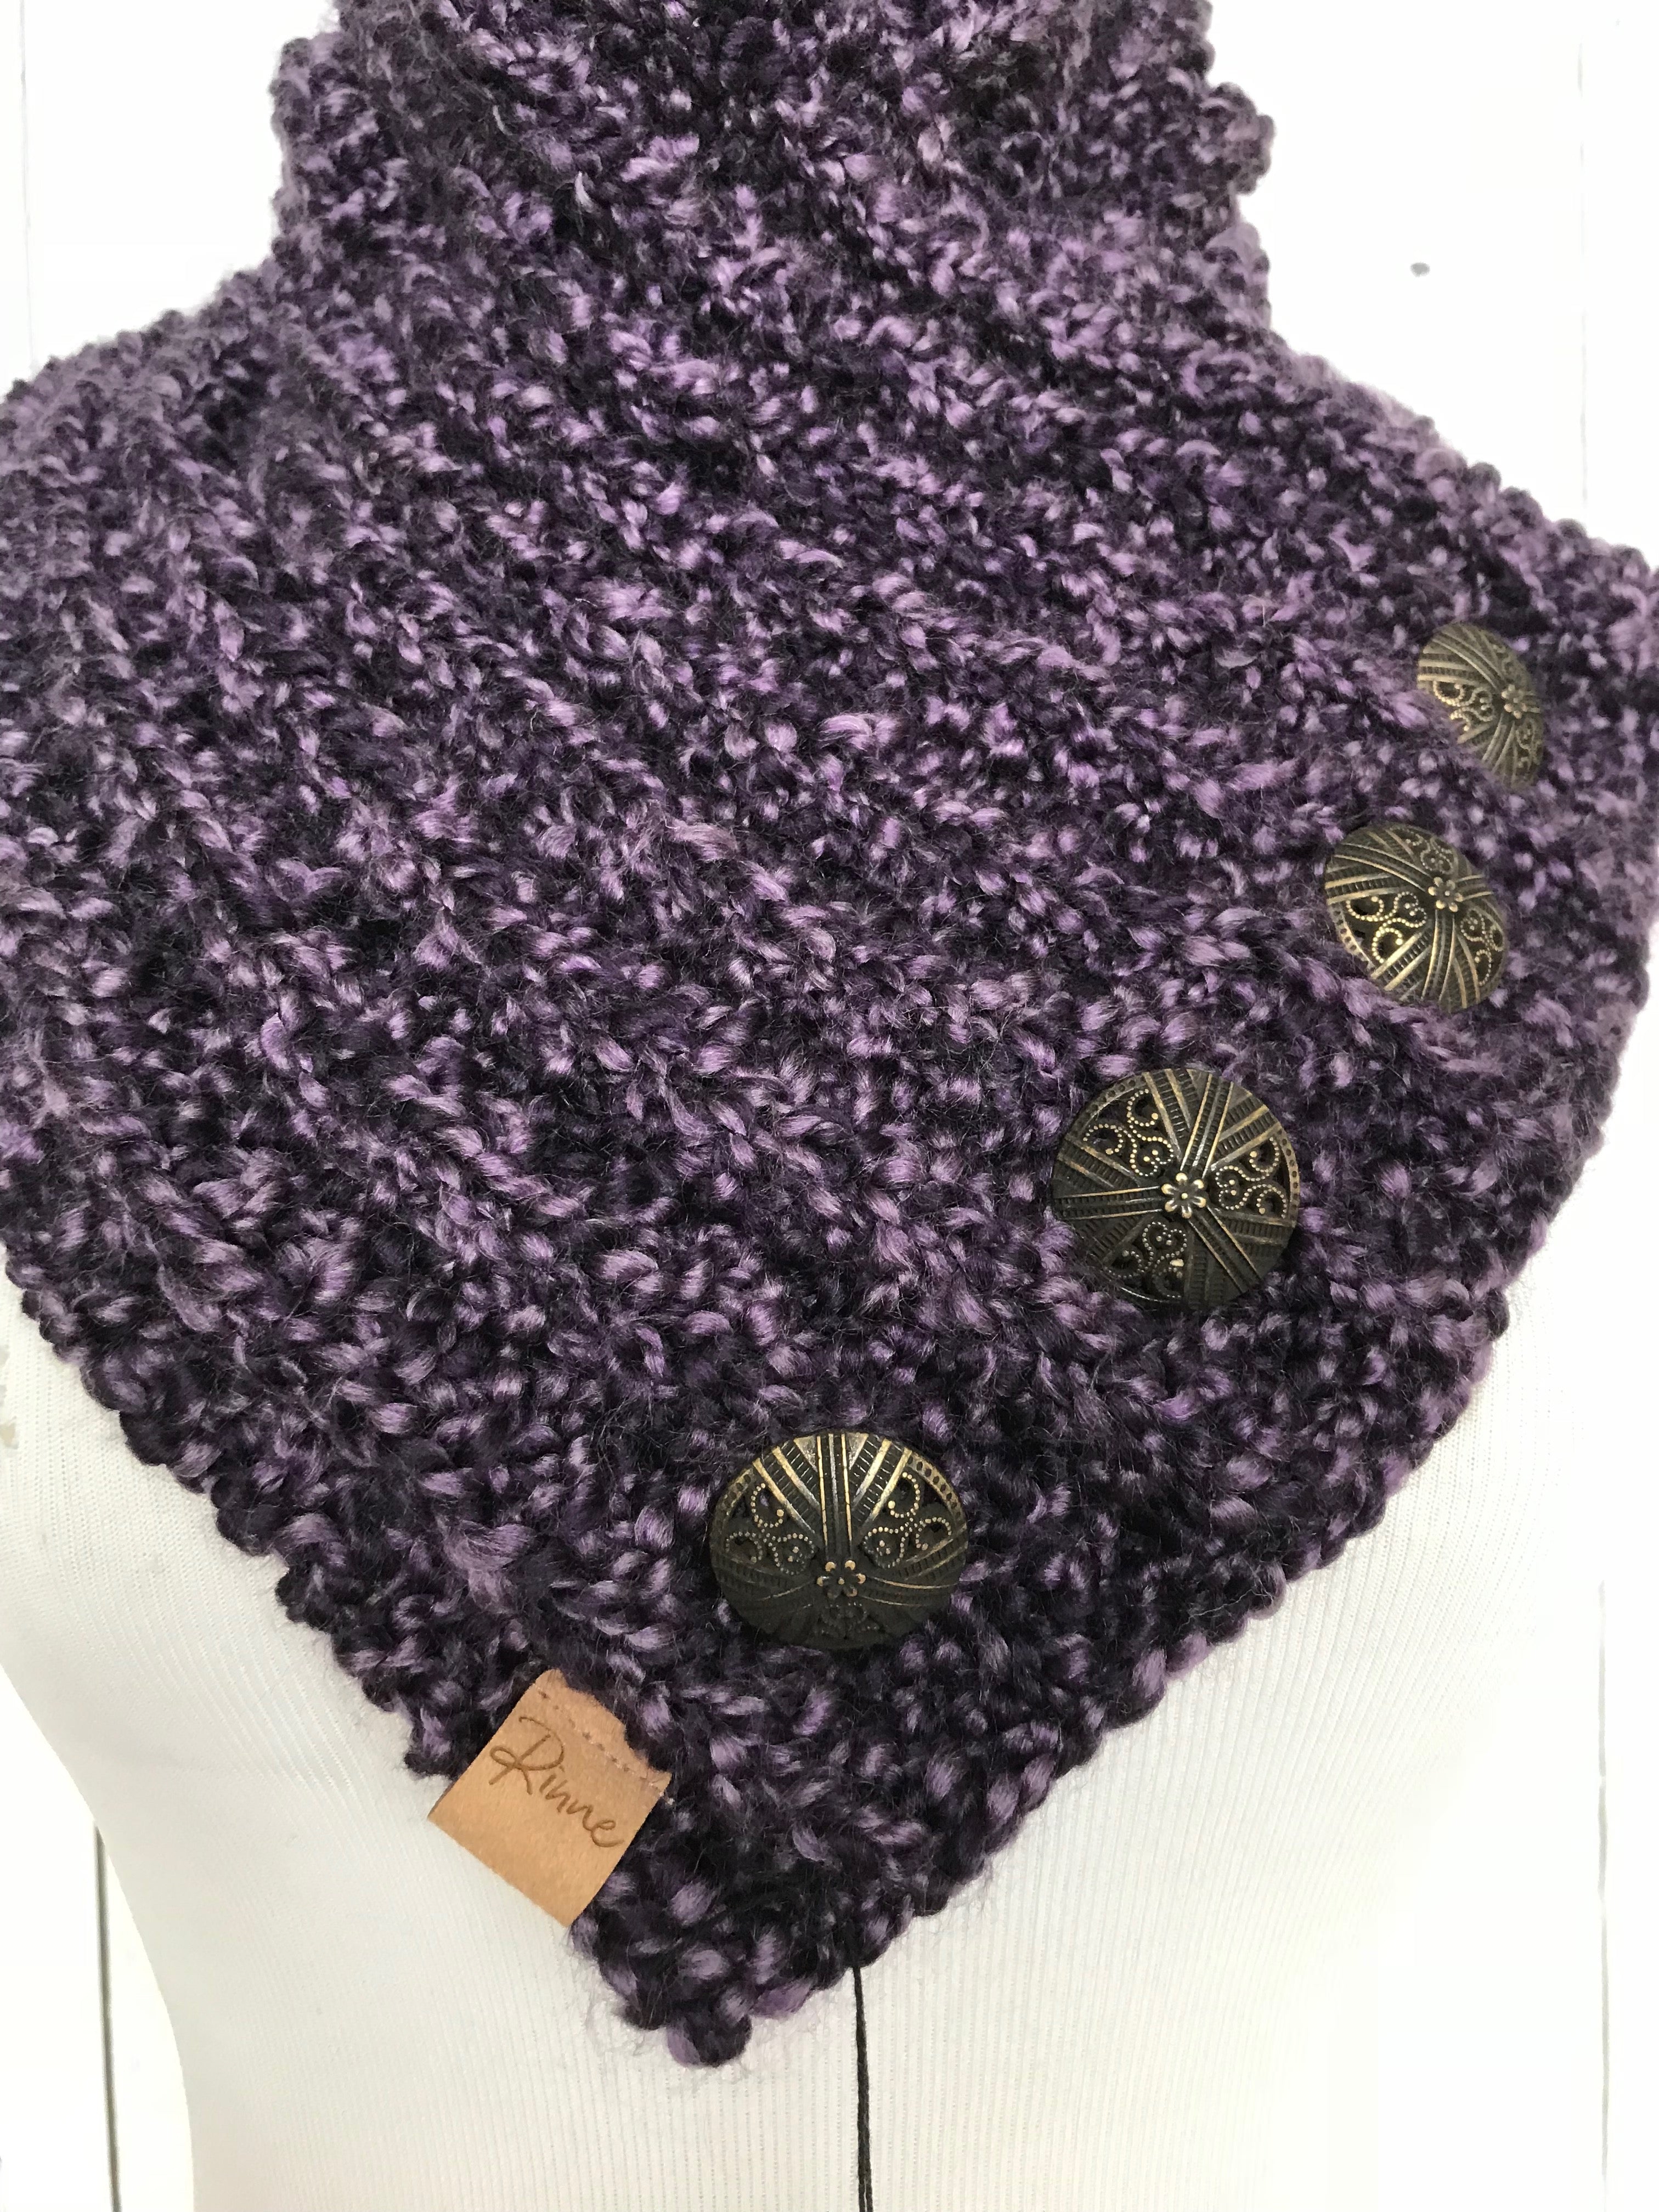 Classic Knit Button Cowl in violet purple with bronze buttons